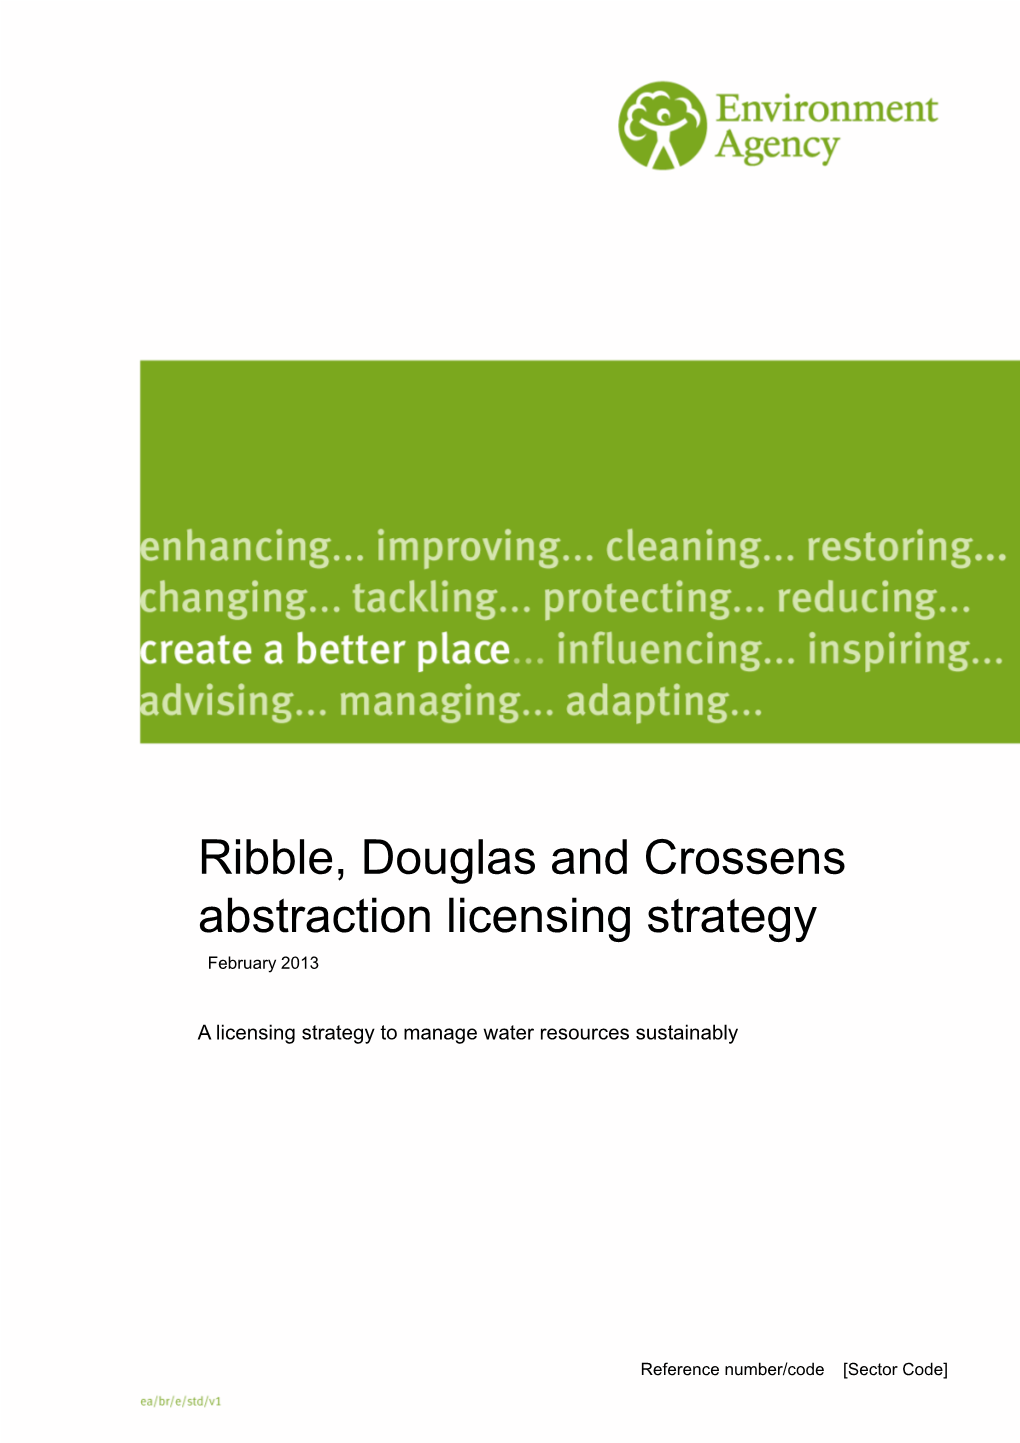 Ribble, Douglas and Crossens Abstraction Licensing Strategy